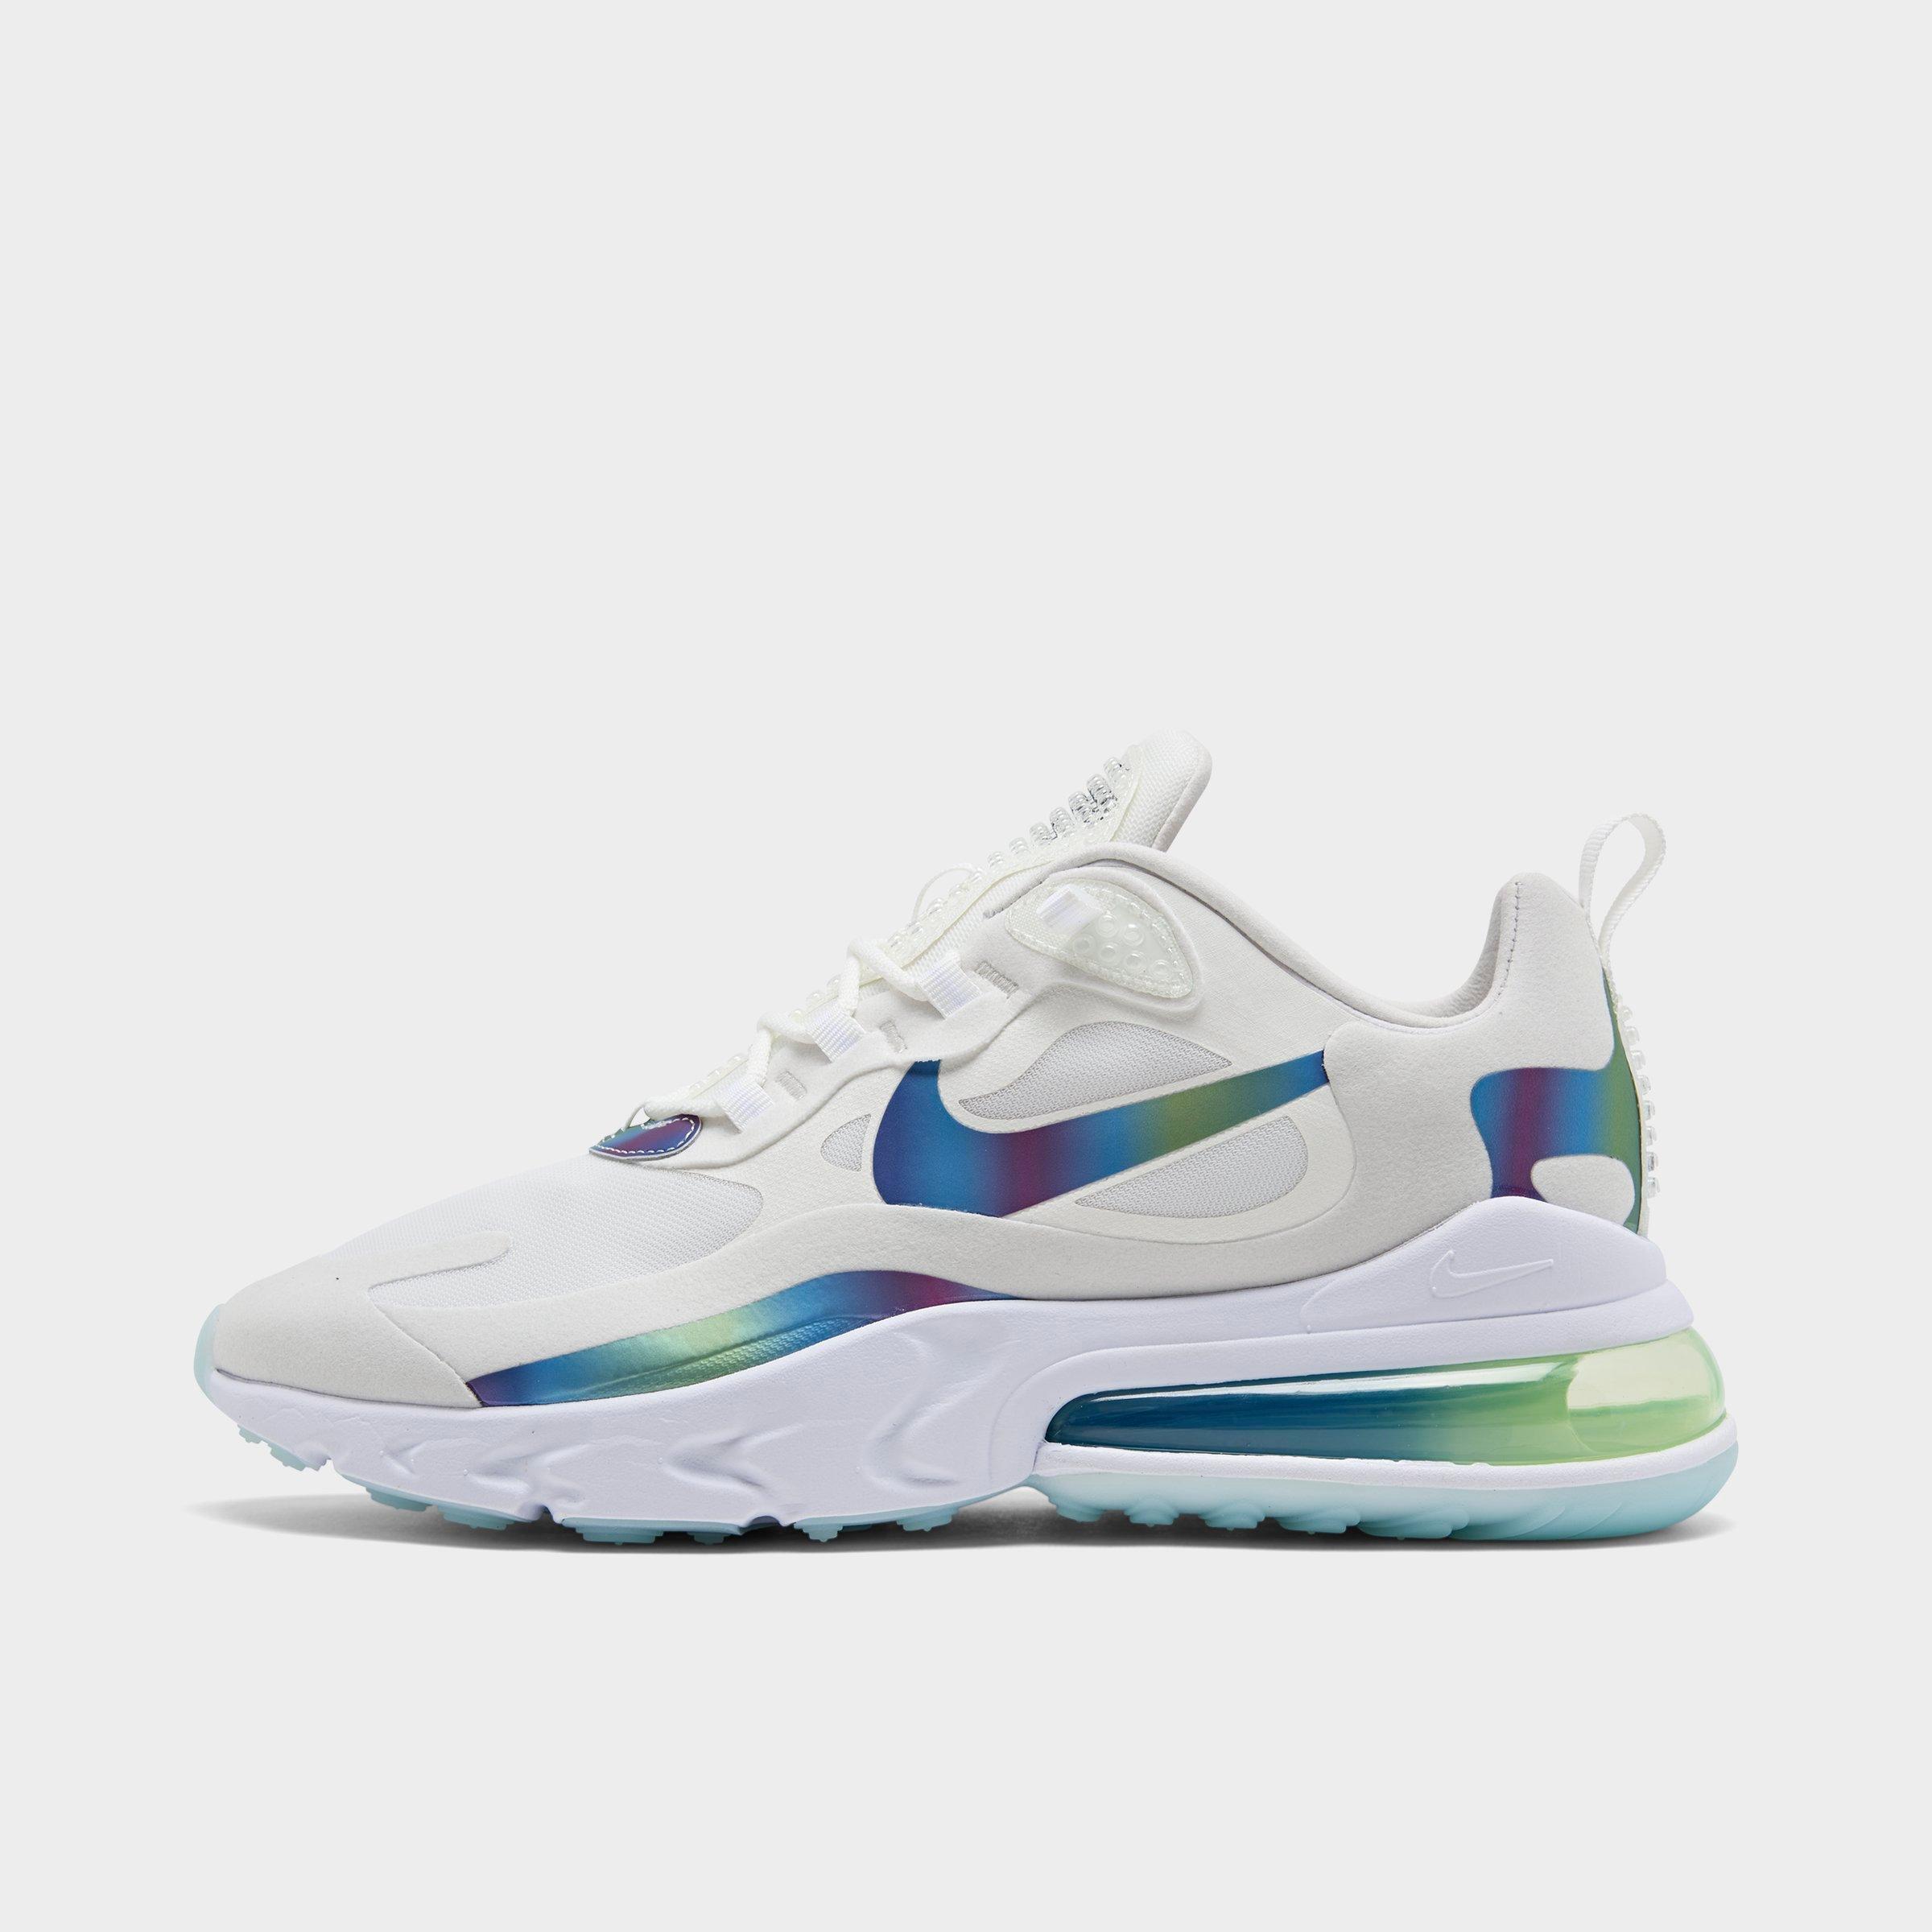 Men's Nike Air Max 270 React 20 Running Shoes| Finish Line